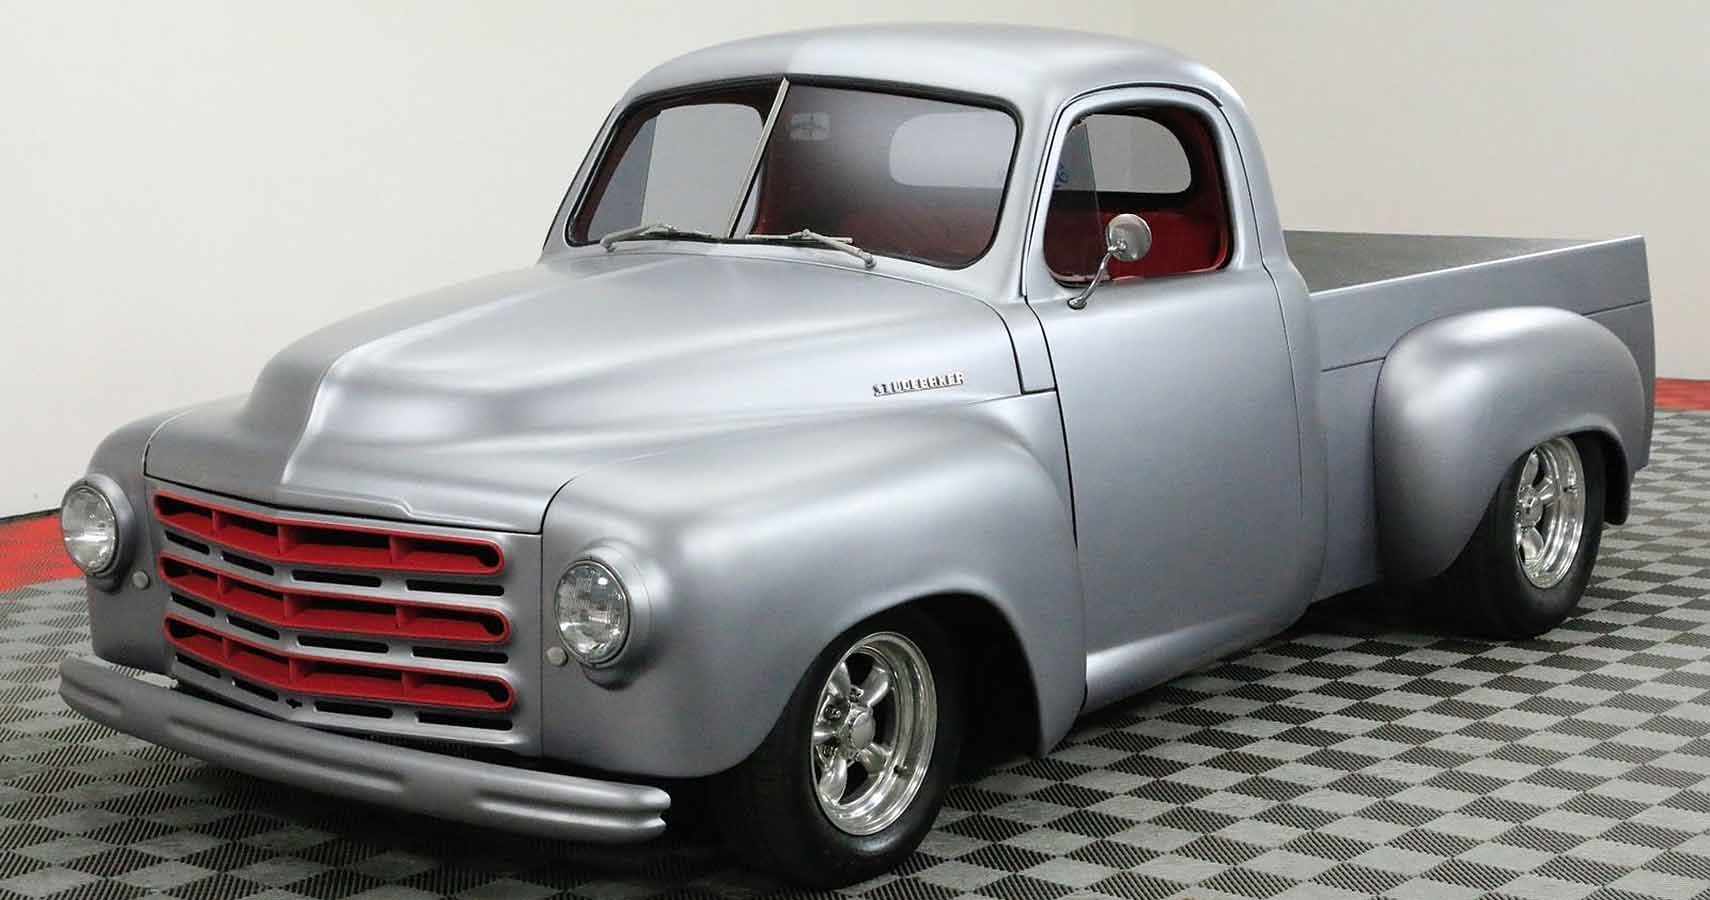 A Silver And Red 1952 Studebaker Pickup